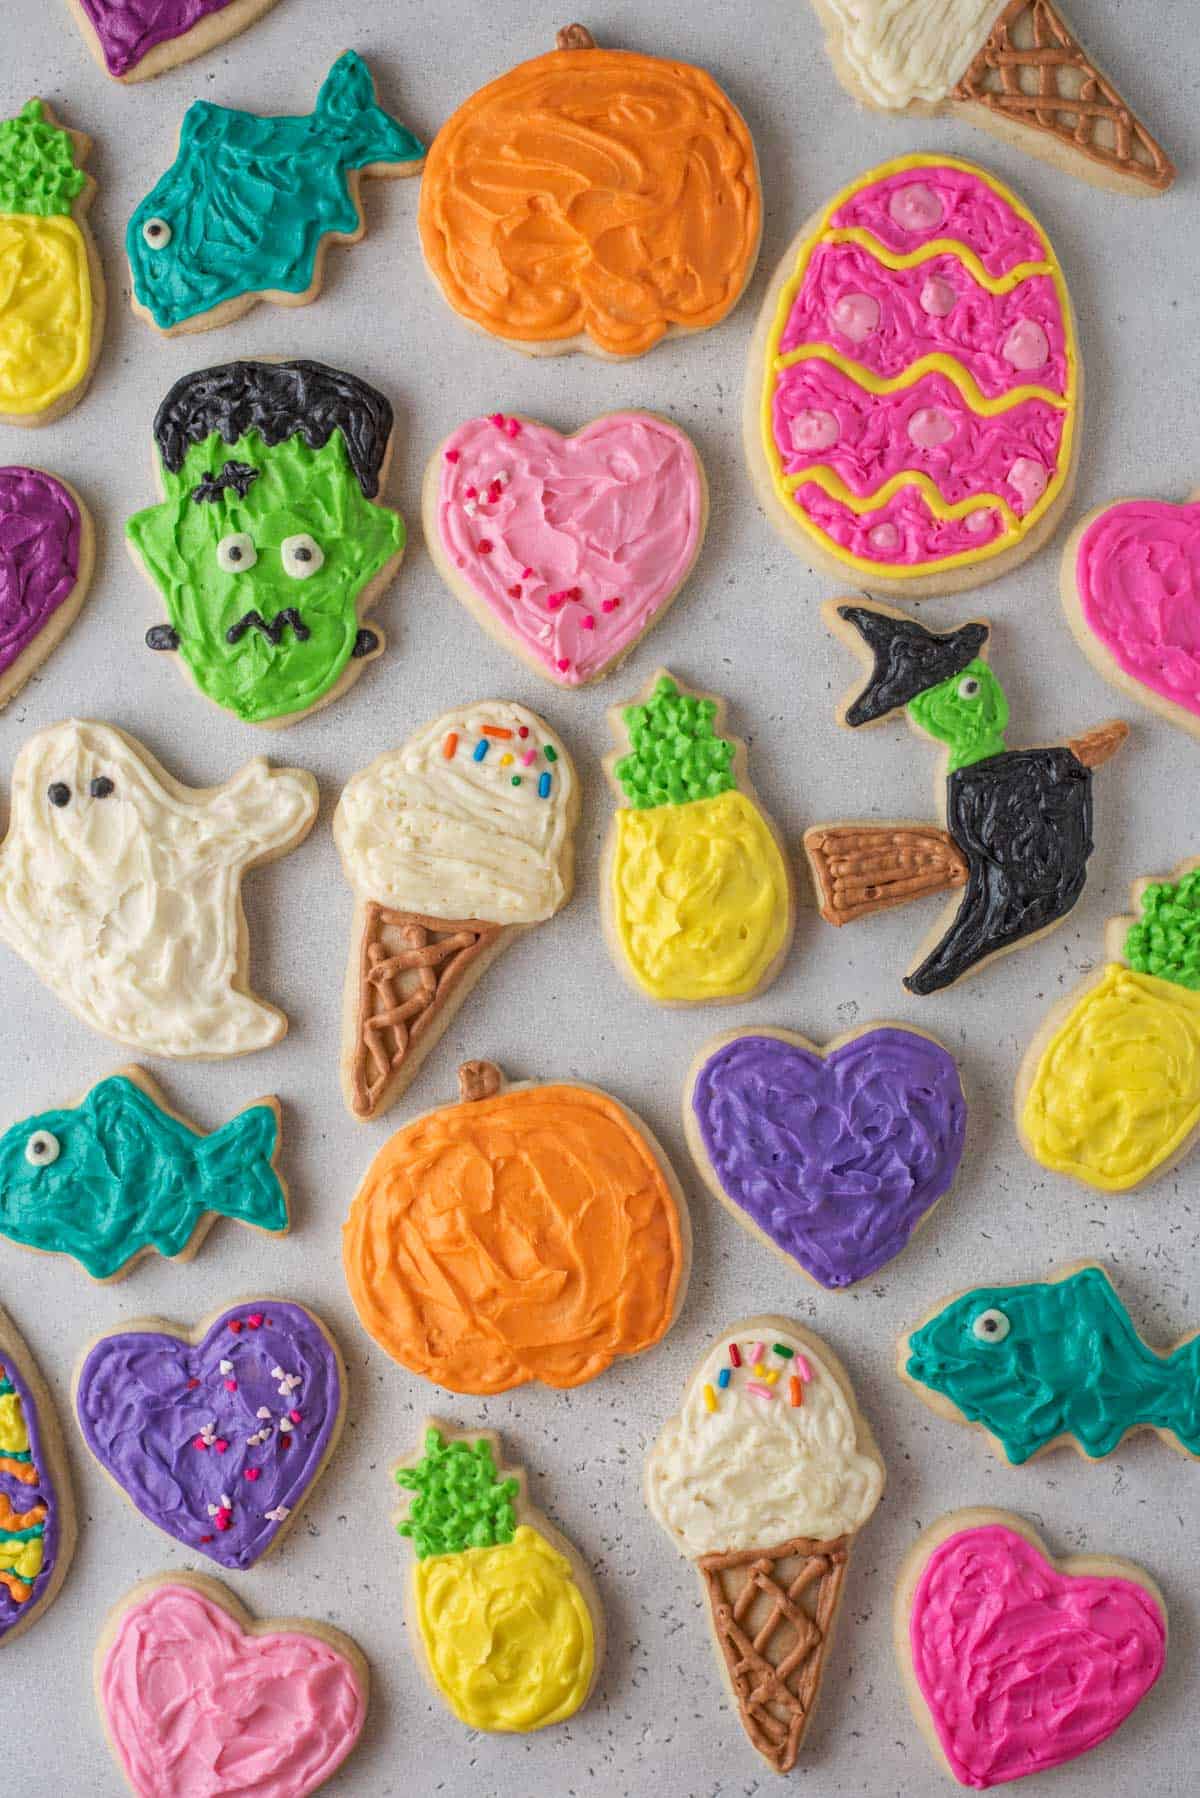 Overhead view of decorated gluten-free cut out sugar cookies